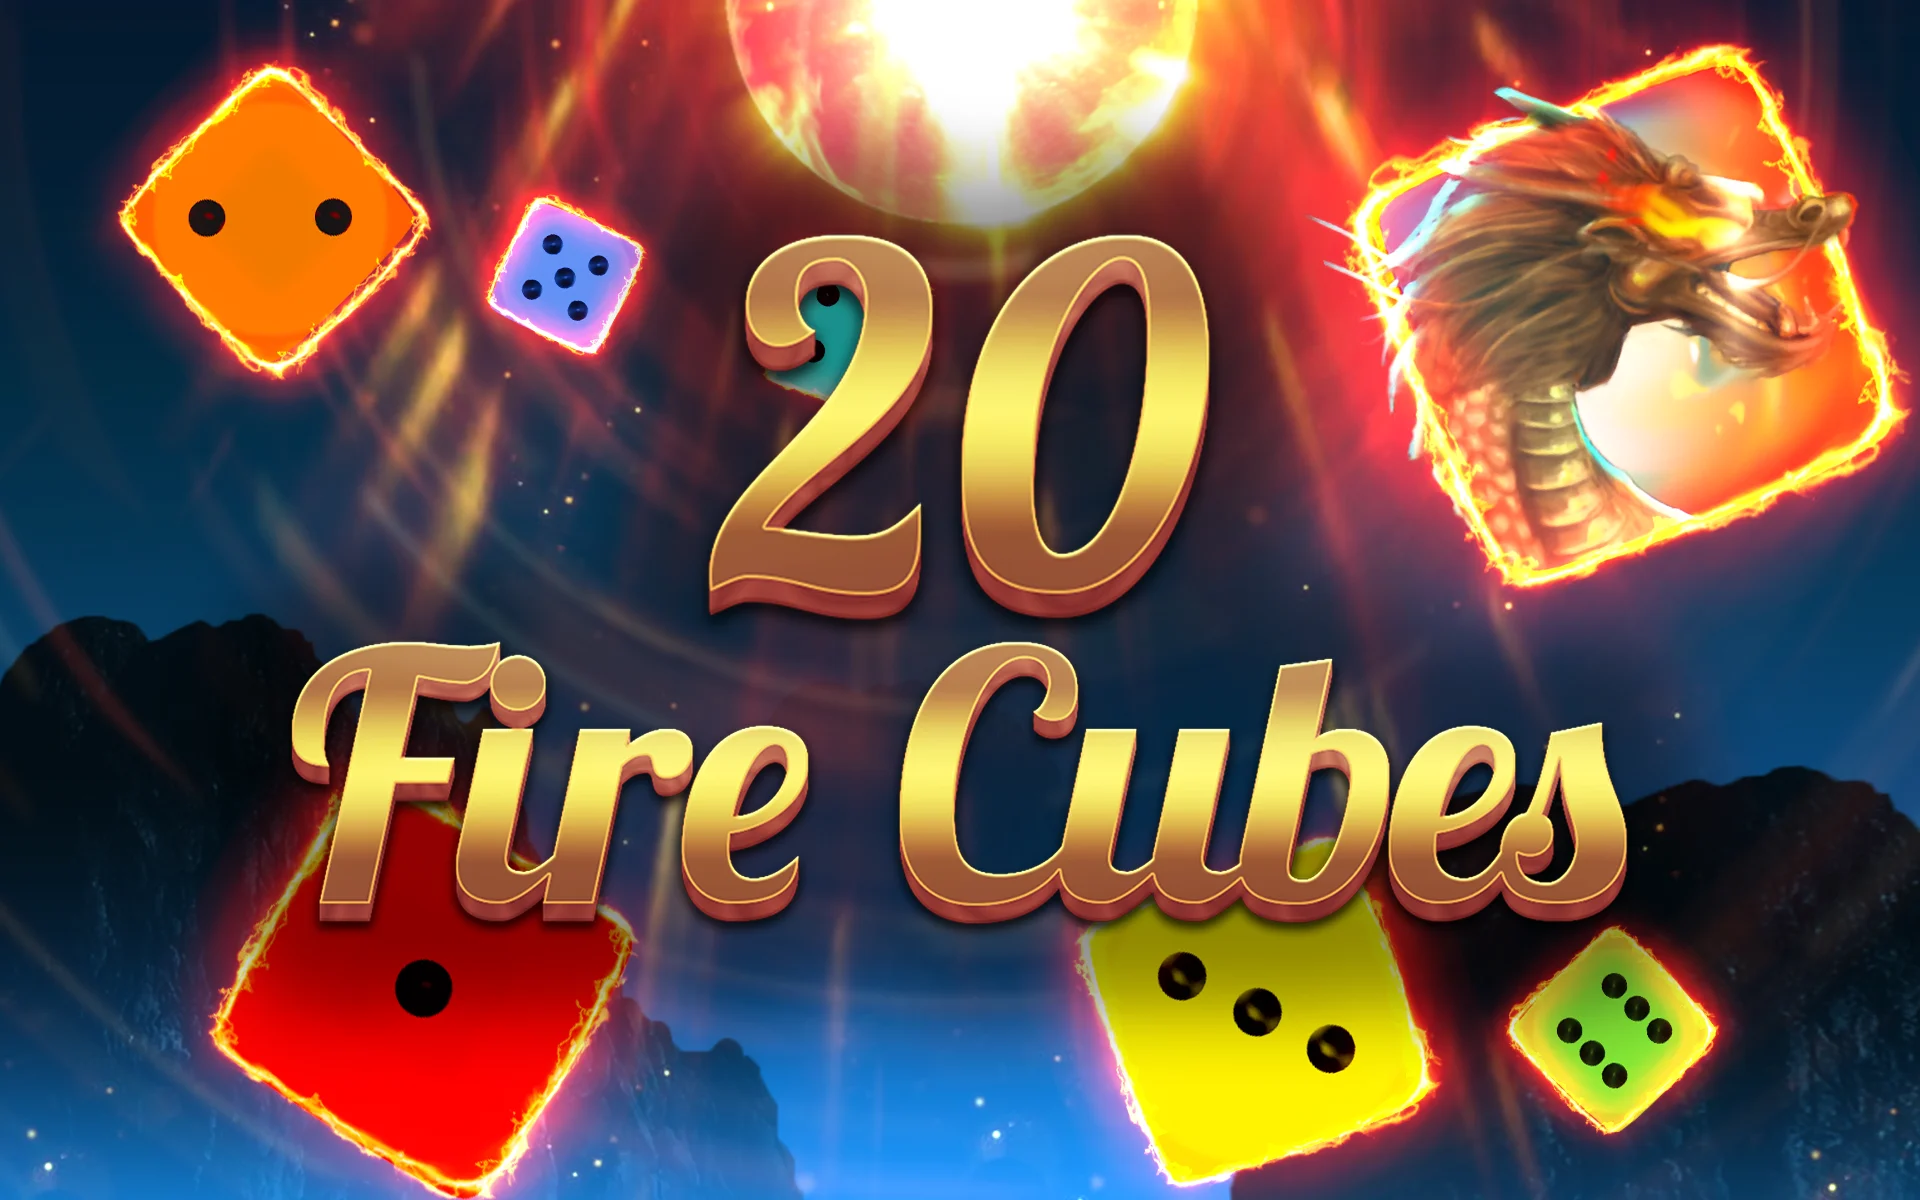 Play 20 Fire Cubes on Starcasino.be online casino